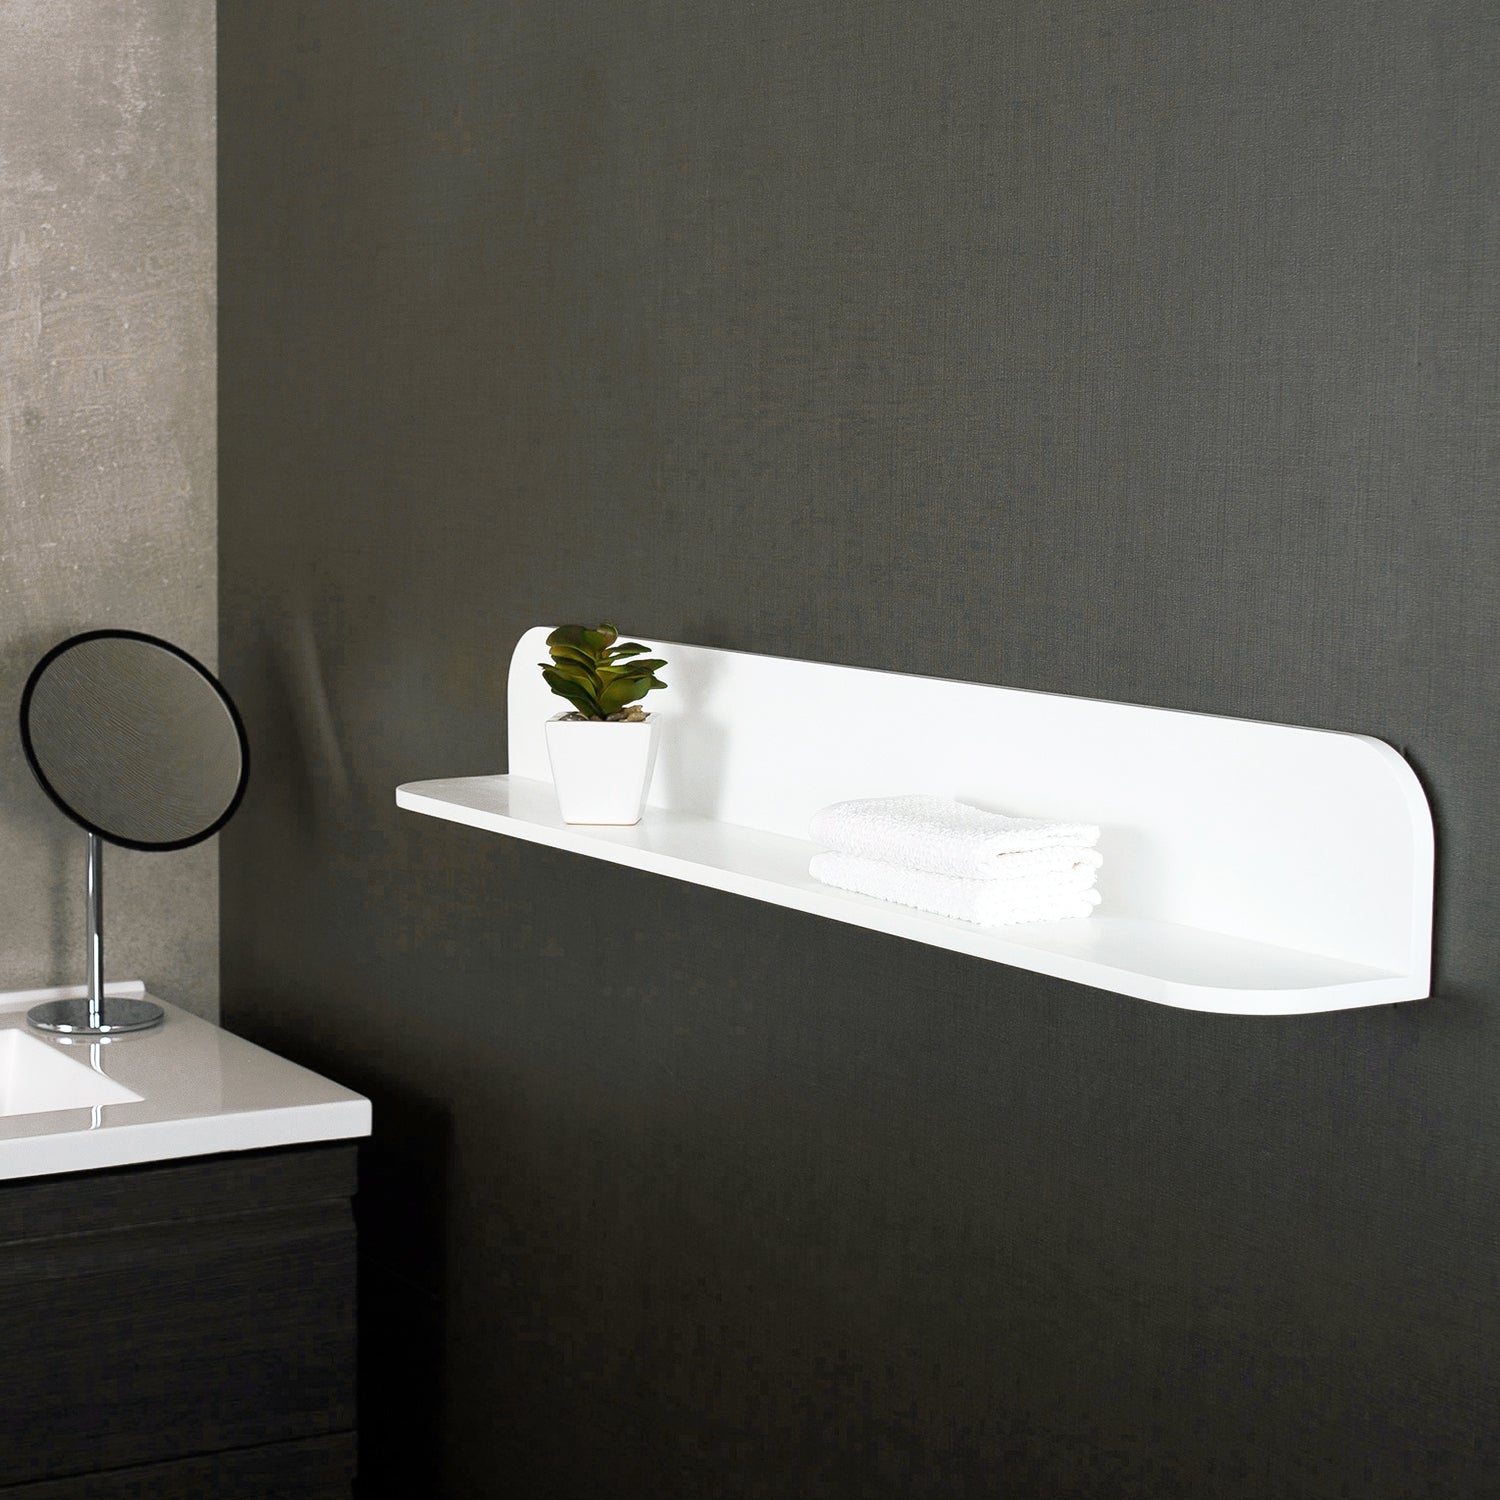 DAX Solid Surface Bathroom Shelf, Wall Mount, White Matte Finish, 35-7/16 x 4-3/4 x 4-3/4 Inches (DAX-AB-1560-35)